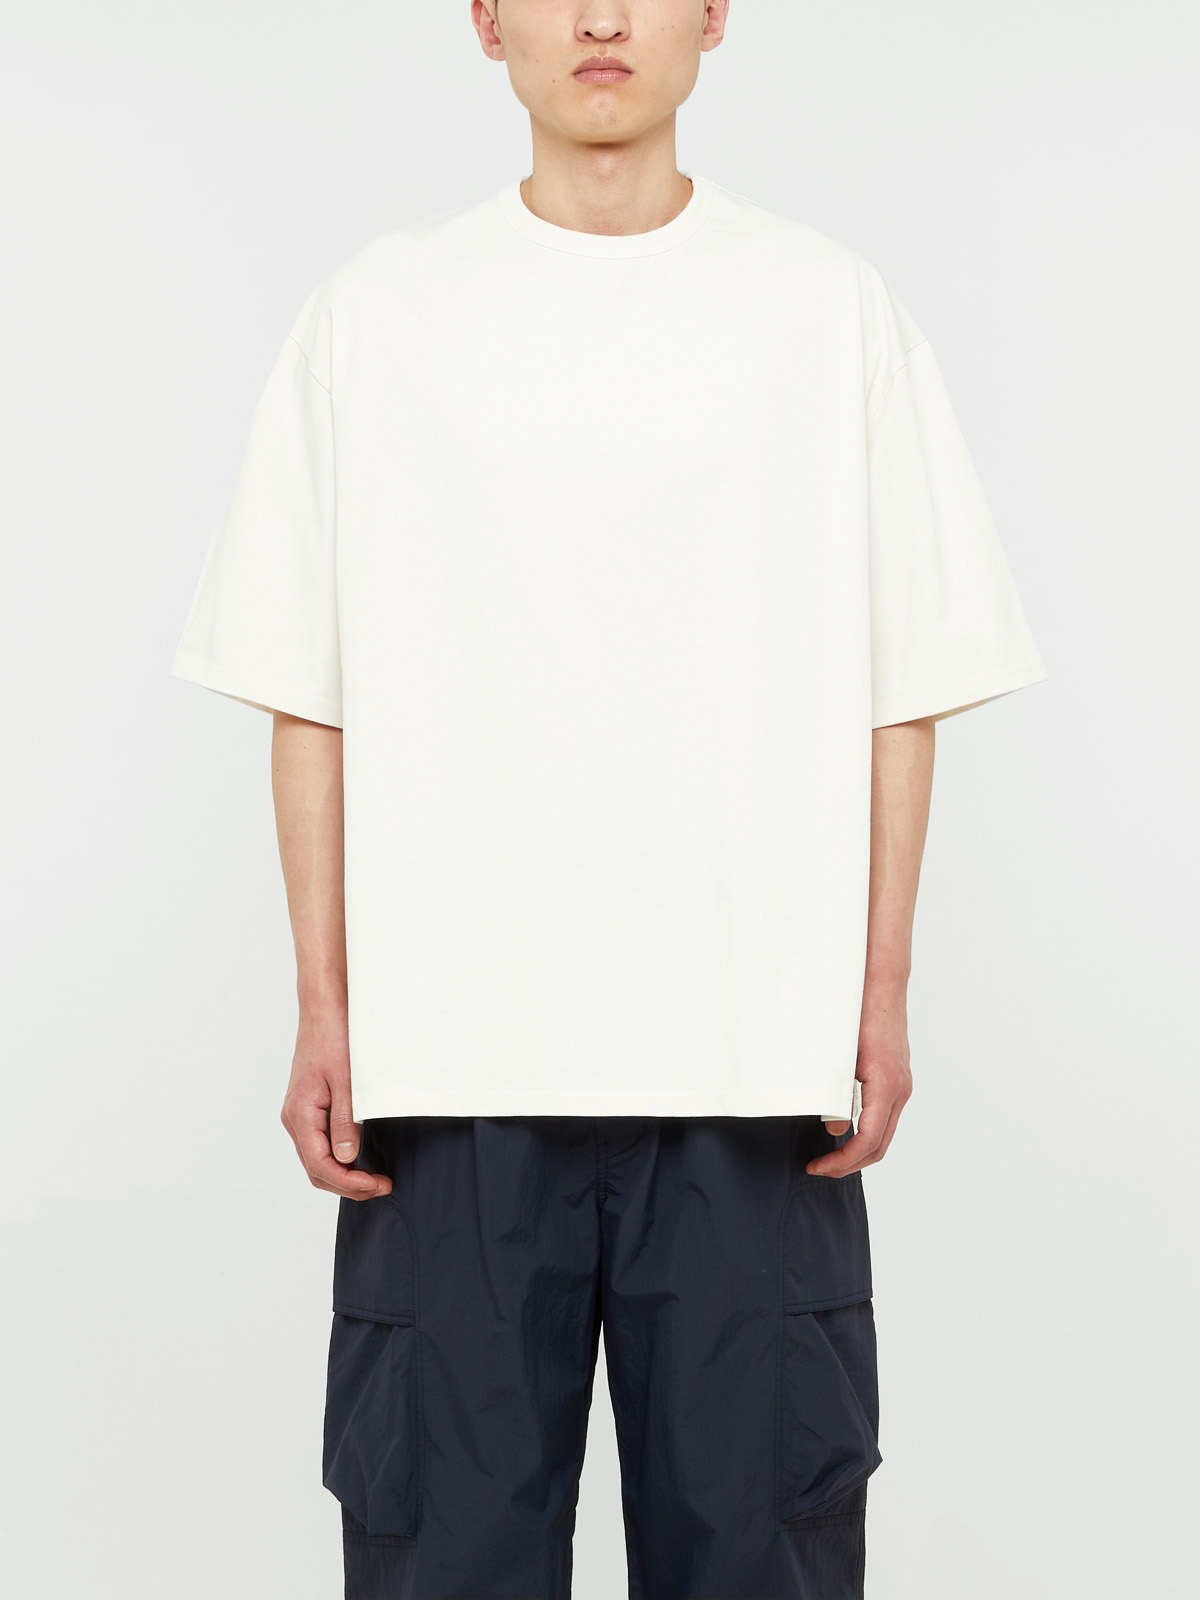 WIDE S/S T-SHIRT (OFF WHITE)